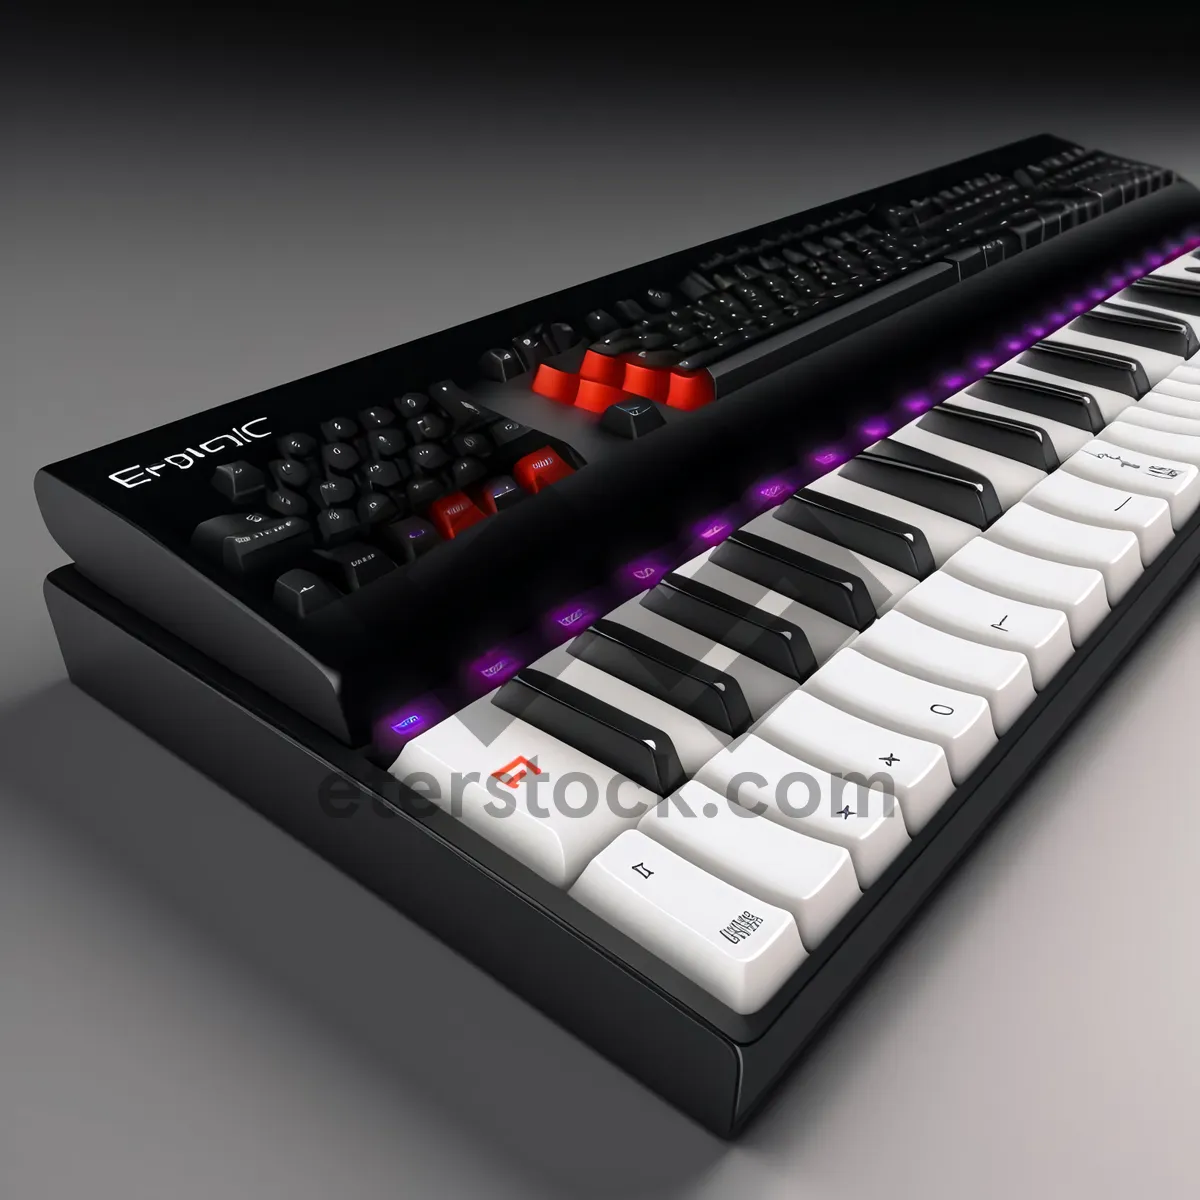 Picture of Modern Electronic Keyboard for Efficient Typing